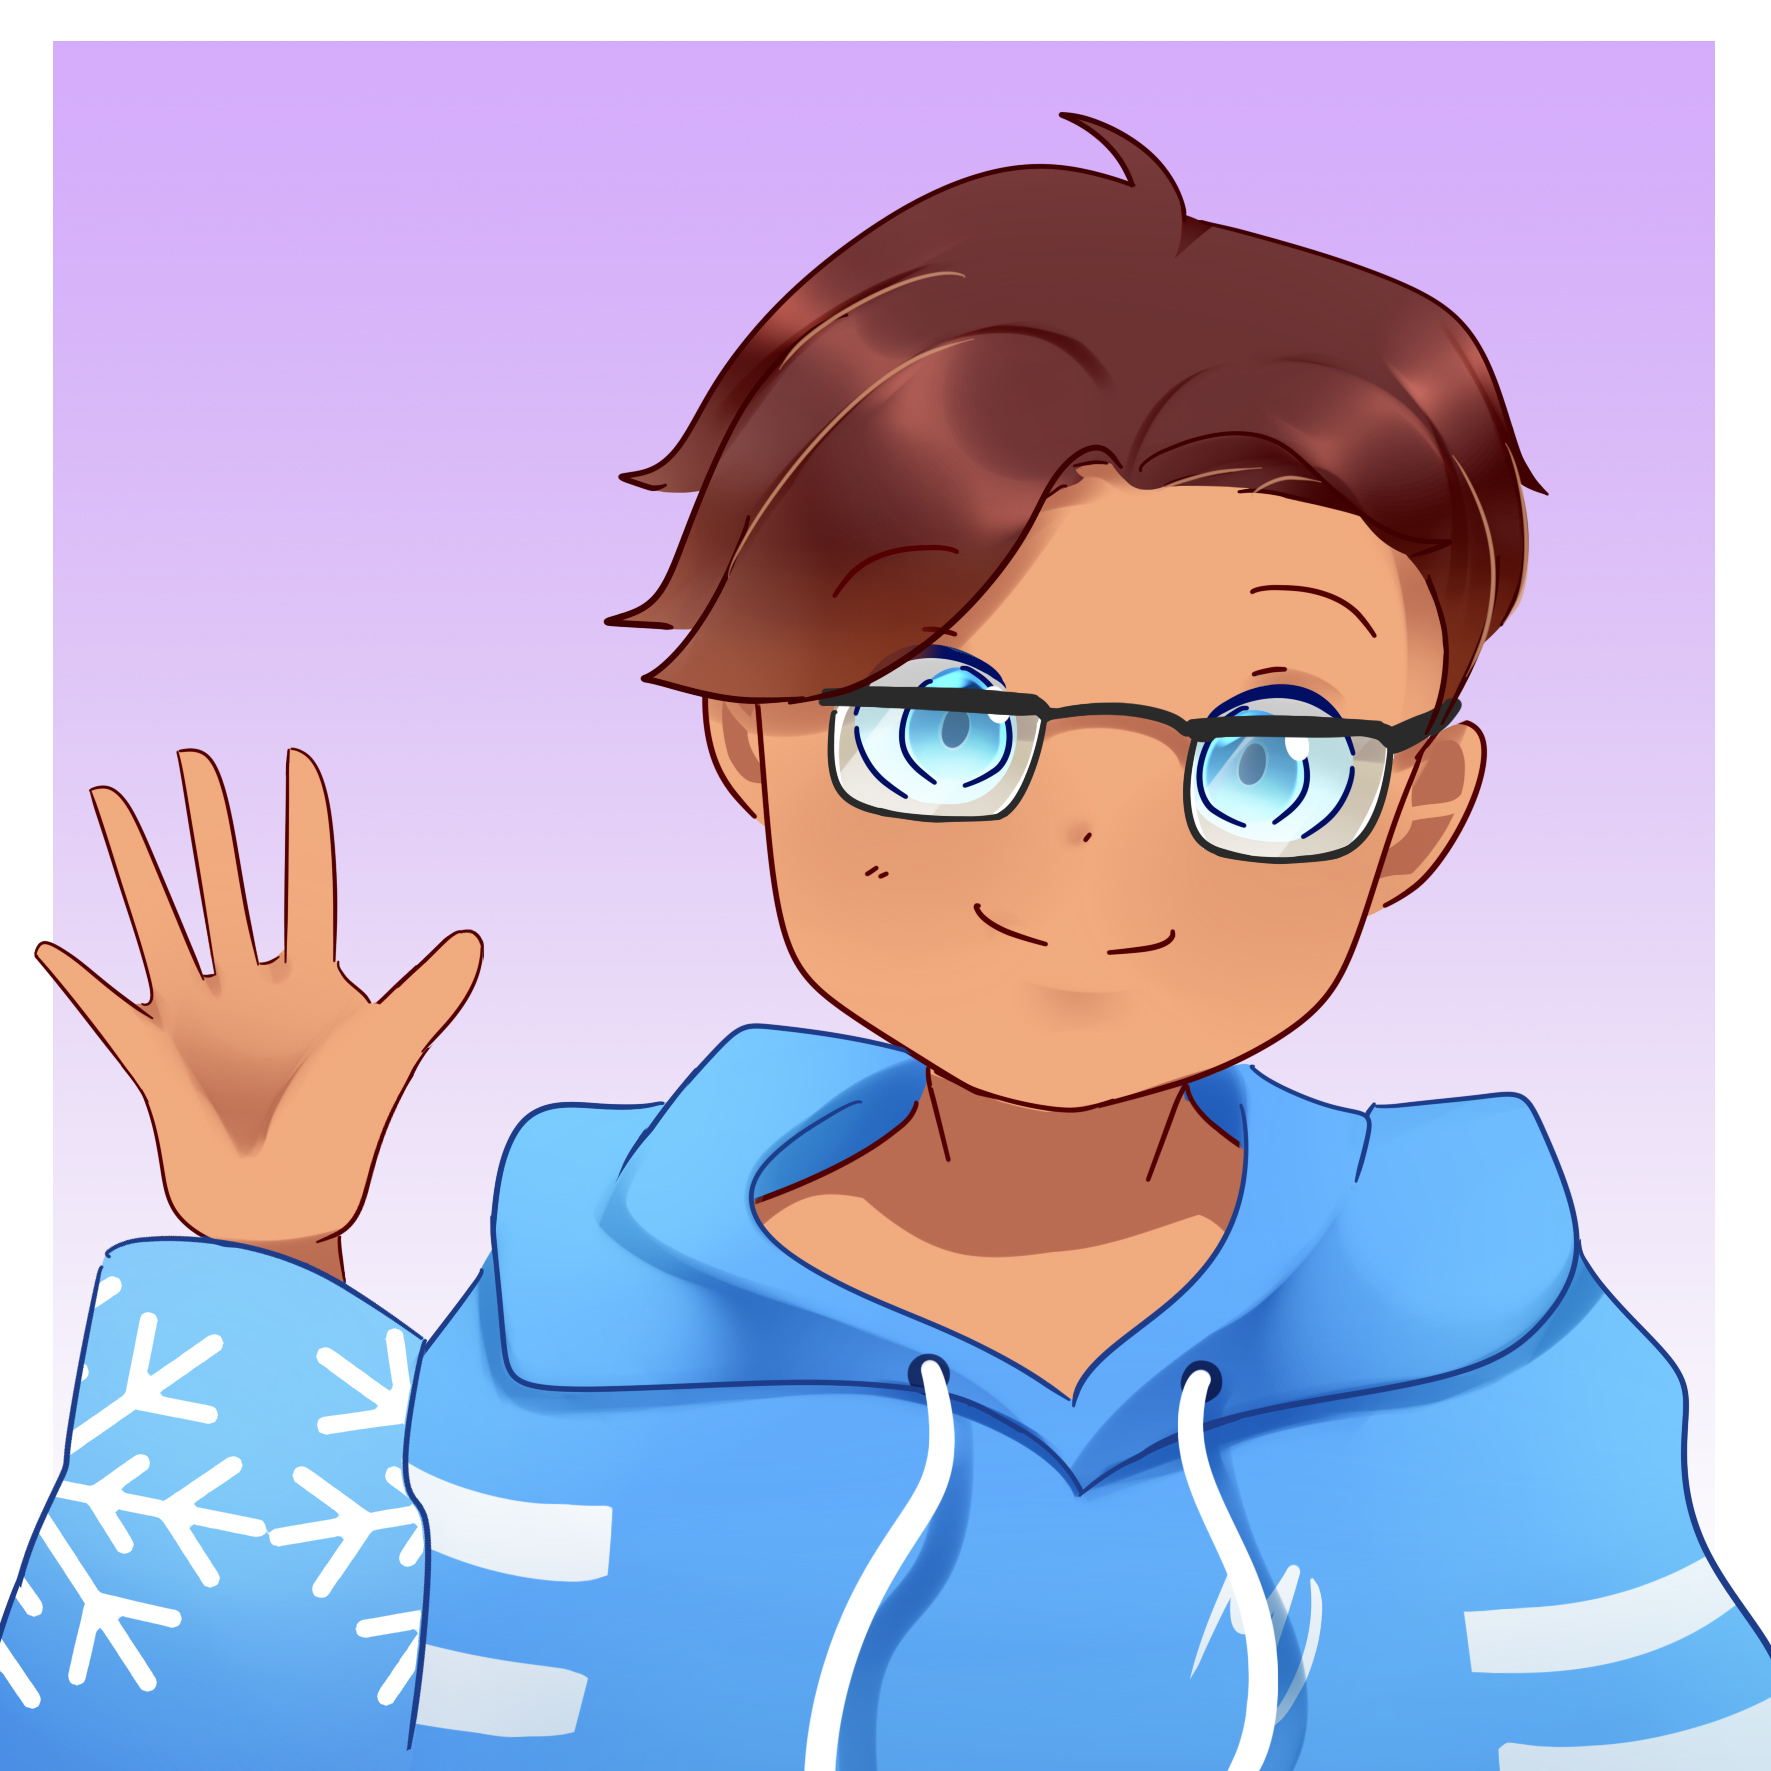 Which Should Be My Profile Pic Fanart Of My Roblox Avatar From My Friend W Fandom - anime cool roblox avatar